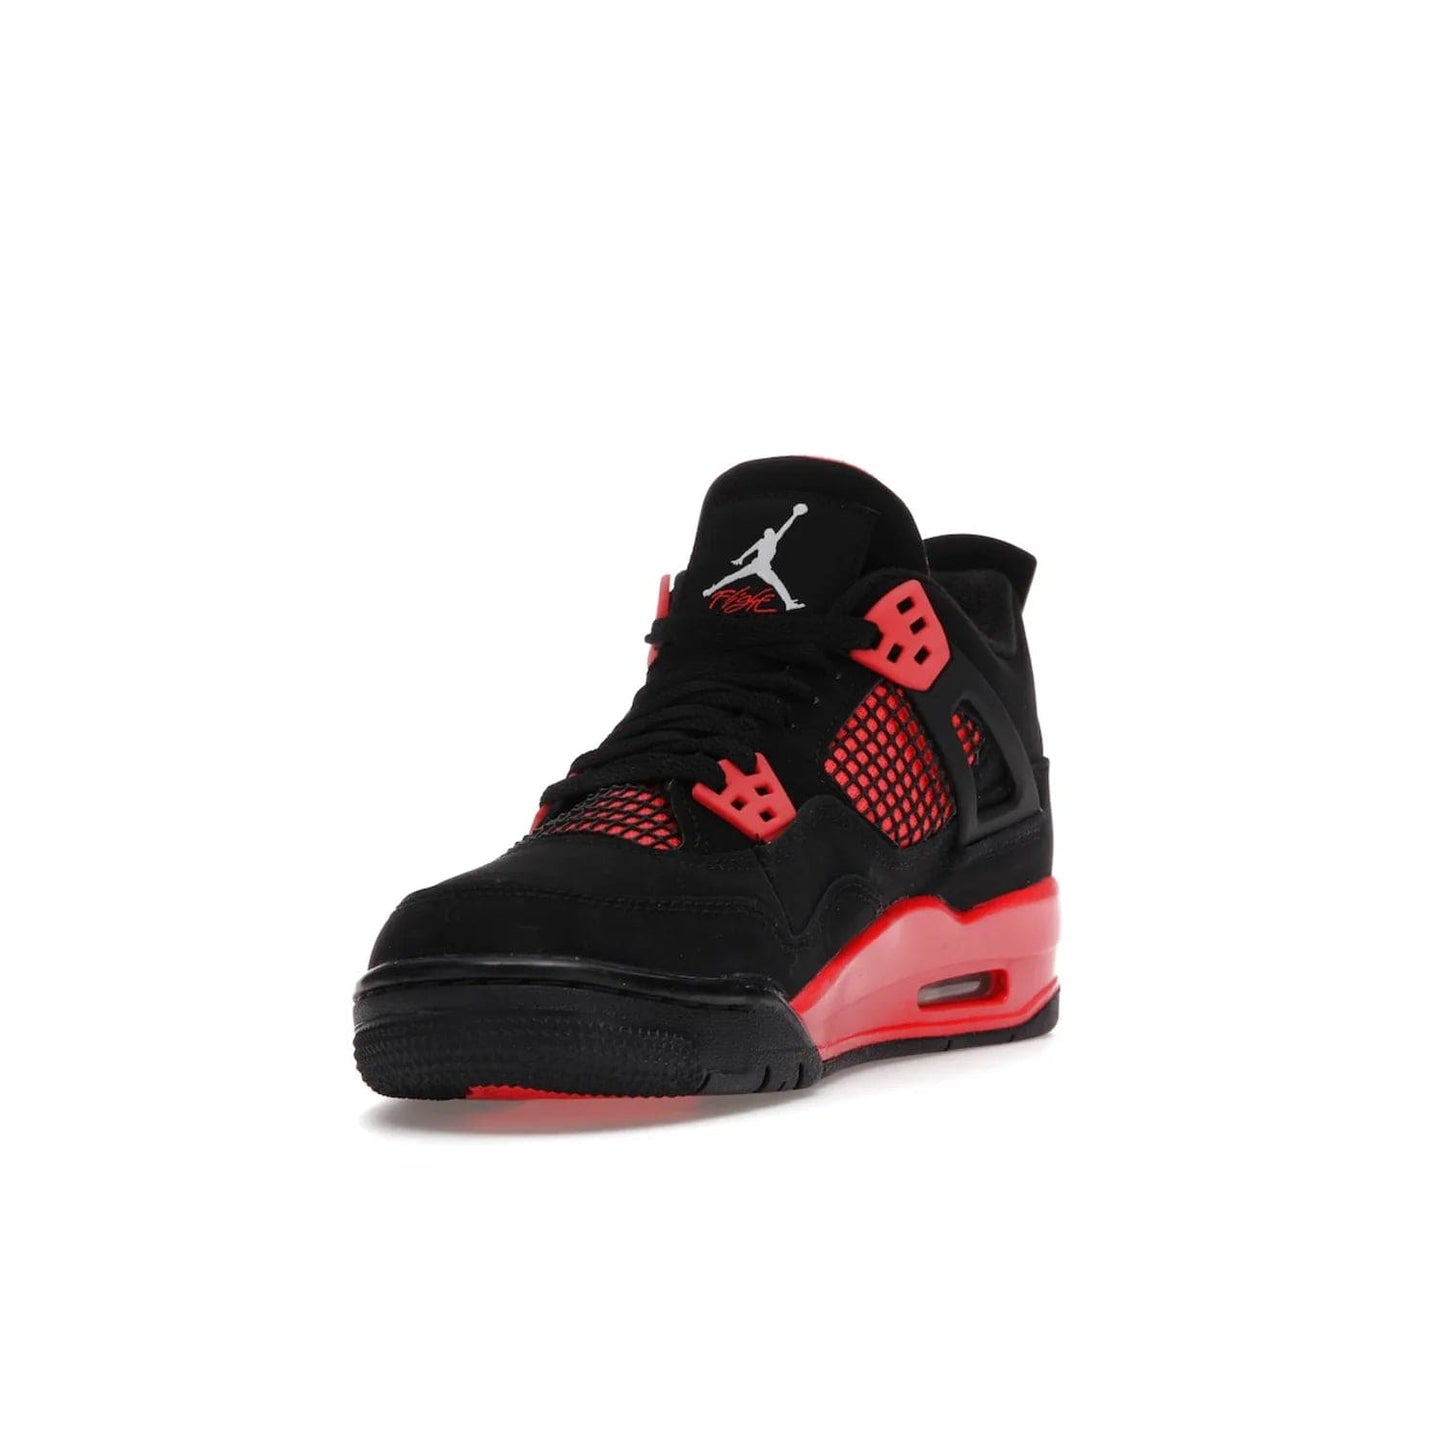 Jordan 4 Retro Red Thunder (GS) - Image 13 - Only at www.BallersClubKickz.com - The Air Jordan 4 Retro Red Thunder GS features a stylish black and crimson upper with a Jumpman logo. Athletic midsole with Air bubbles for cushioning and black rubber outsole with iconic motif complete this classic sneaker.